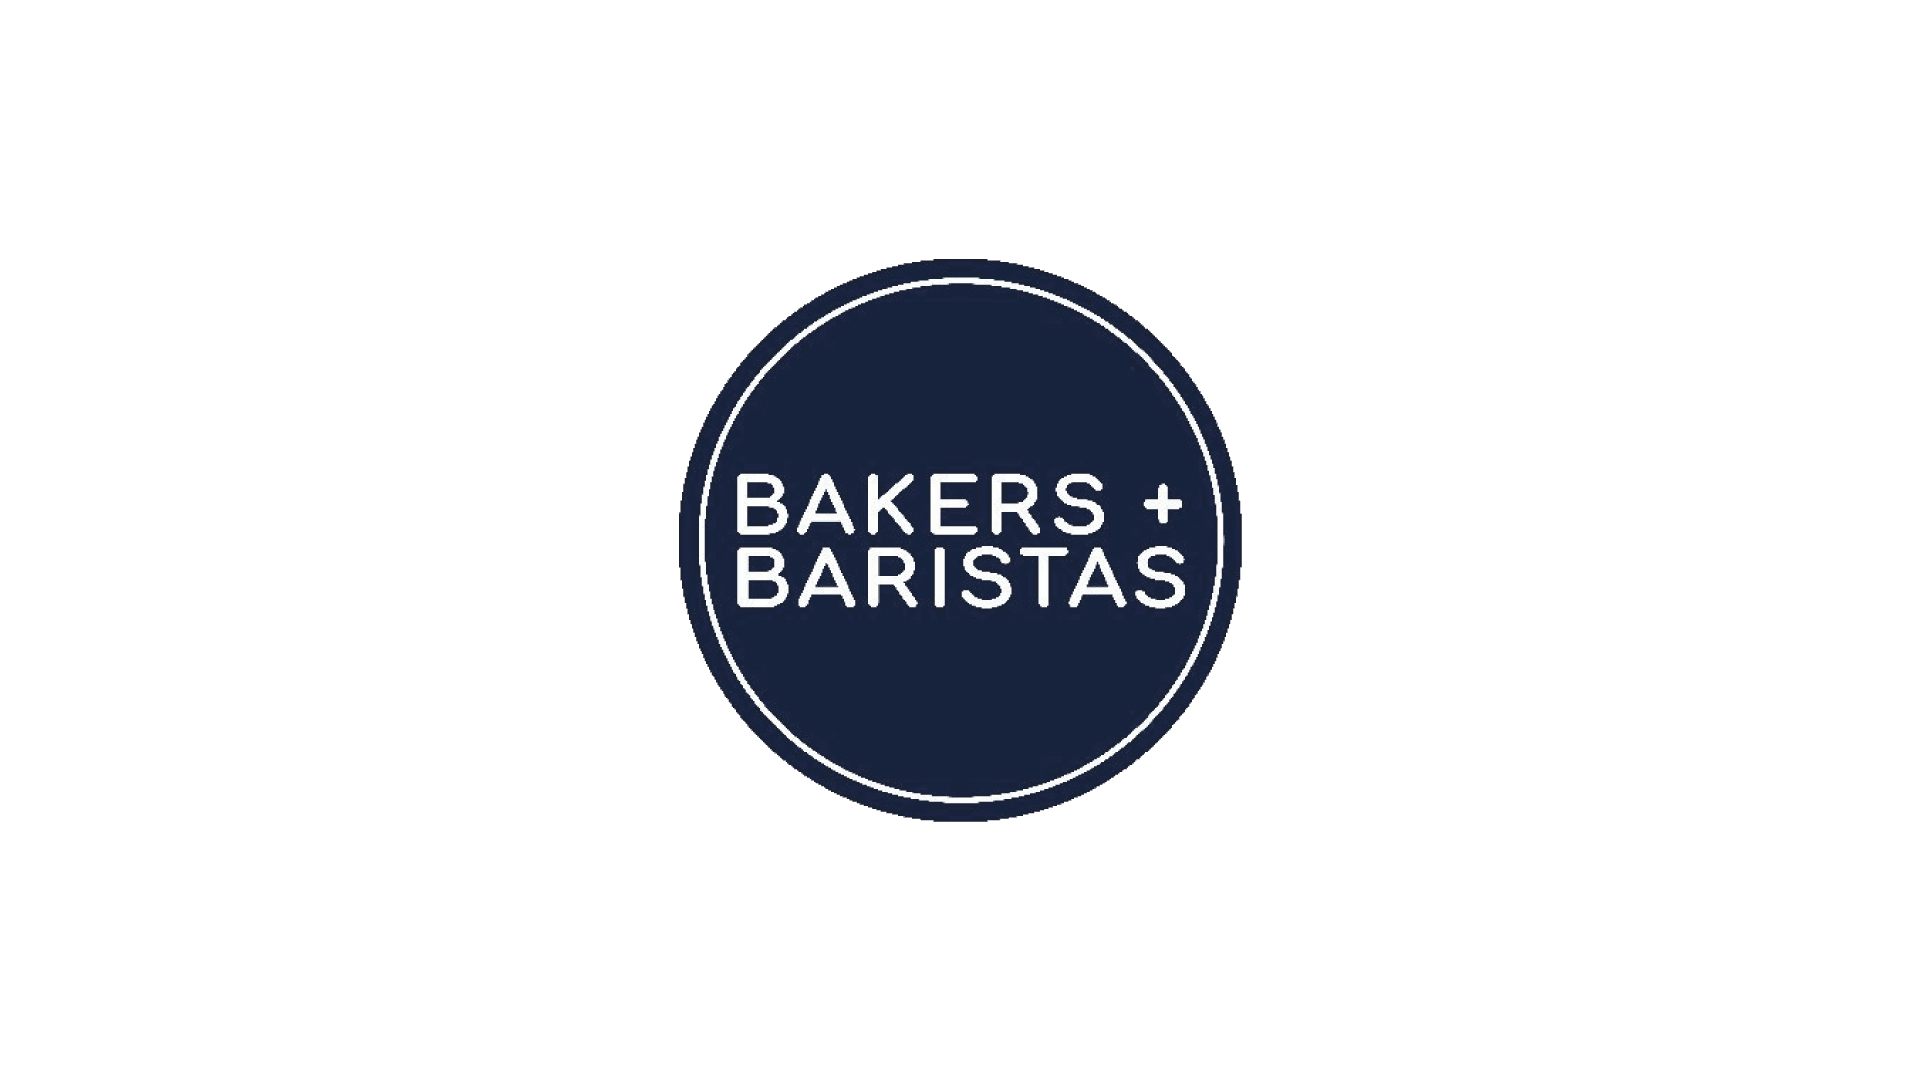 Bakers and Baristas works with Prosper, CADS' Retail Design Agency